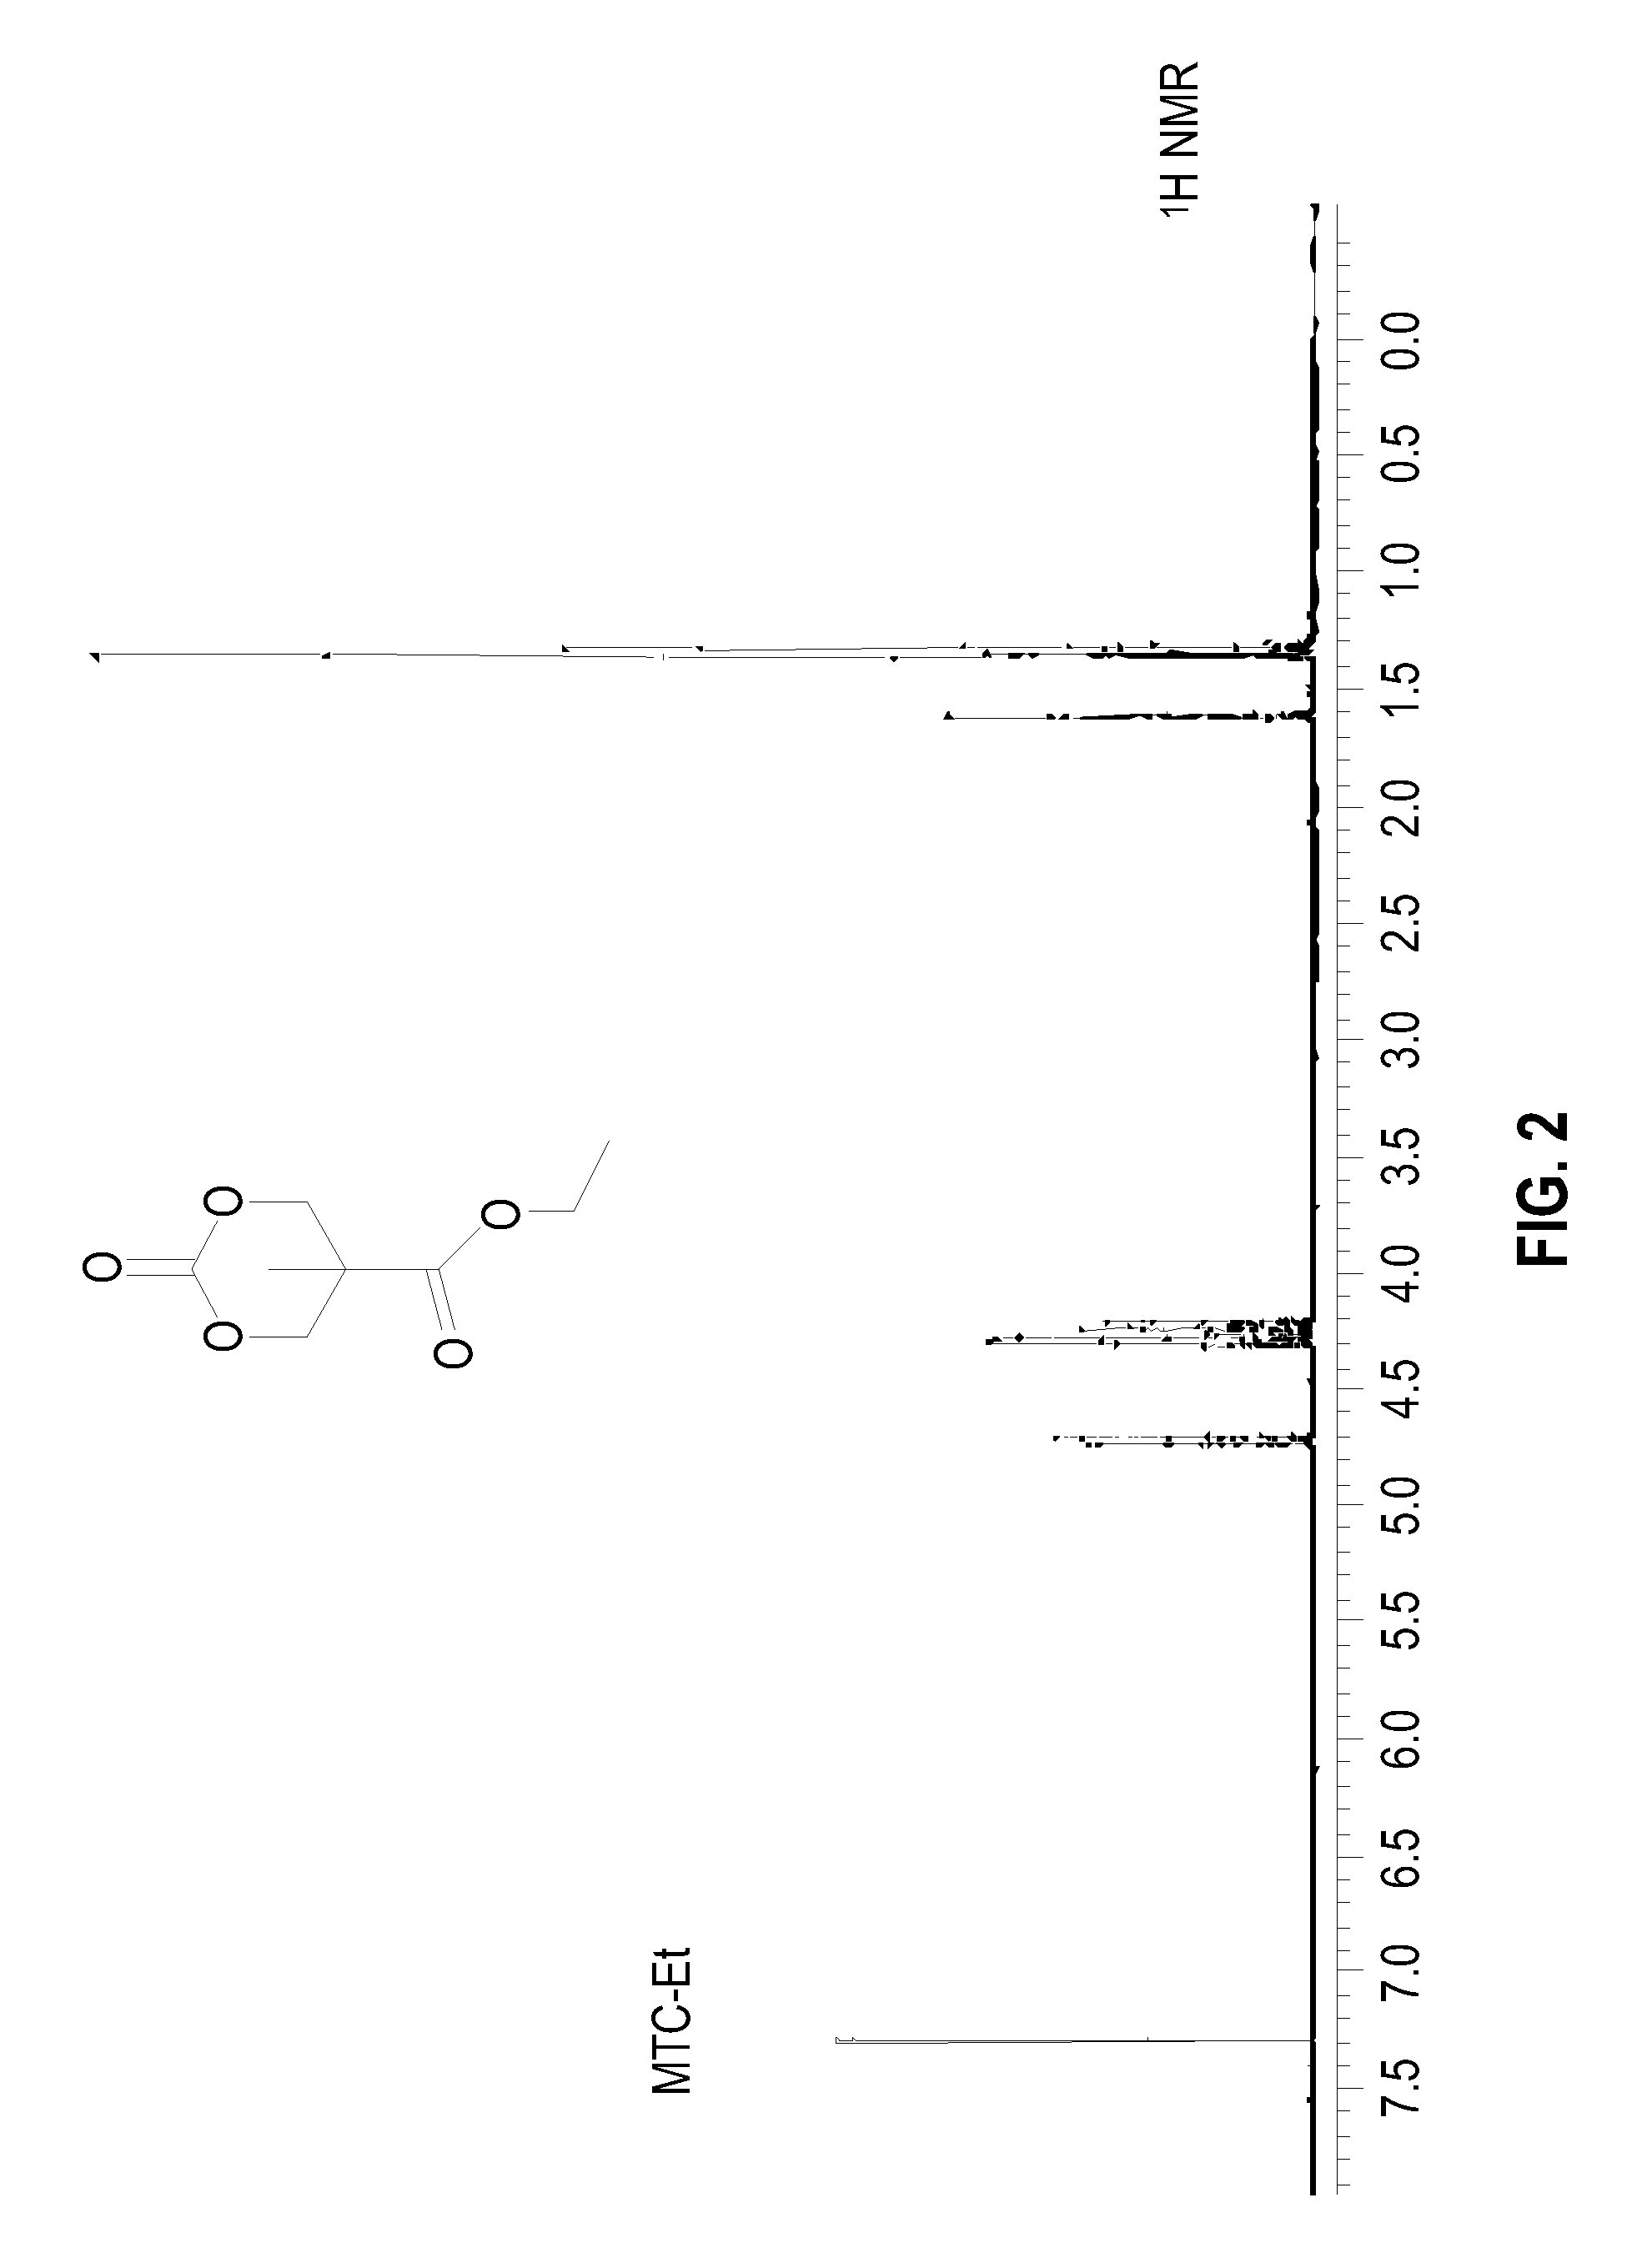 Polymers bearing pendant pentafluorophenyl ester groups, and methods of synthesis and functionalization thereof